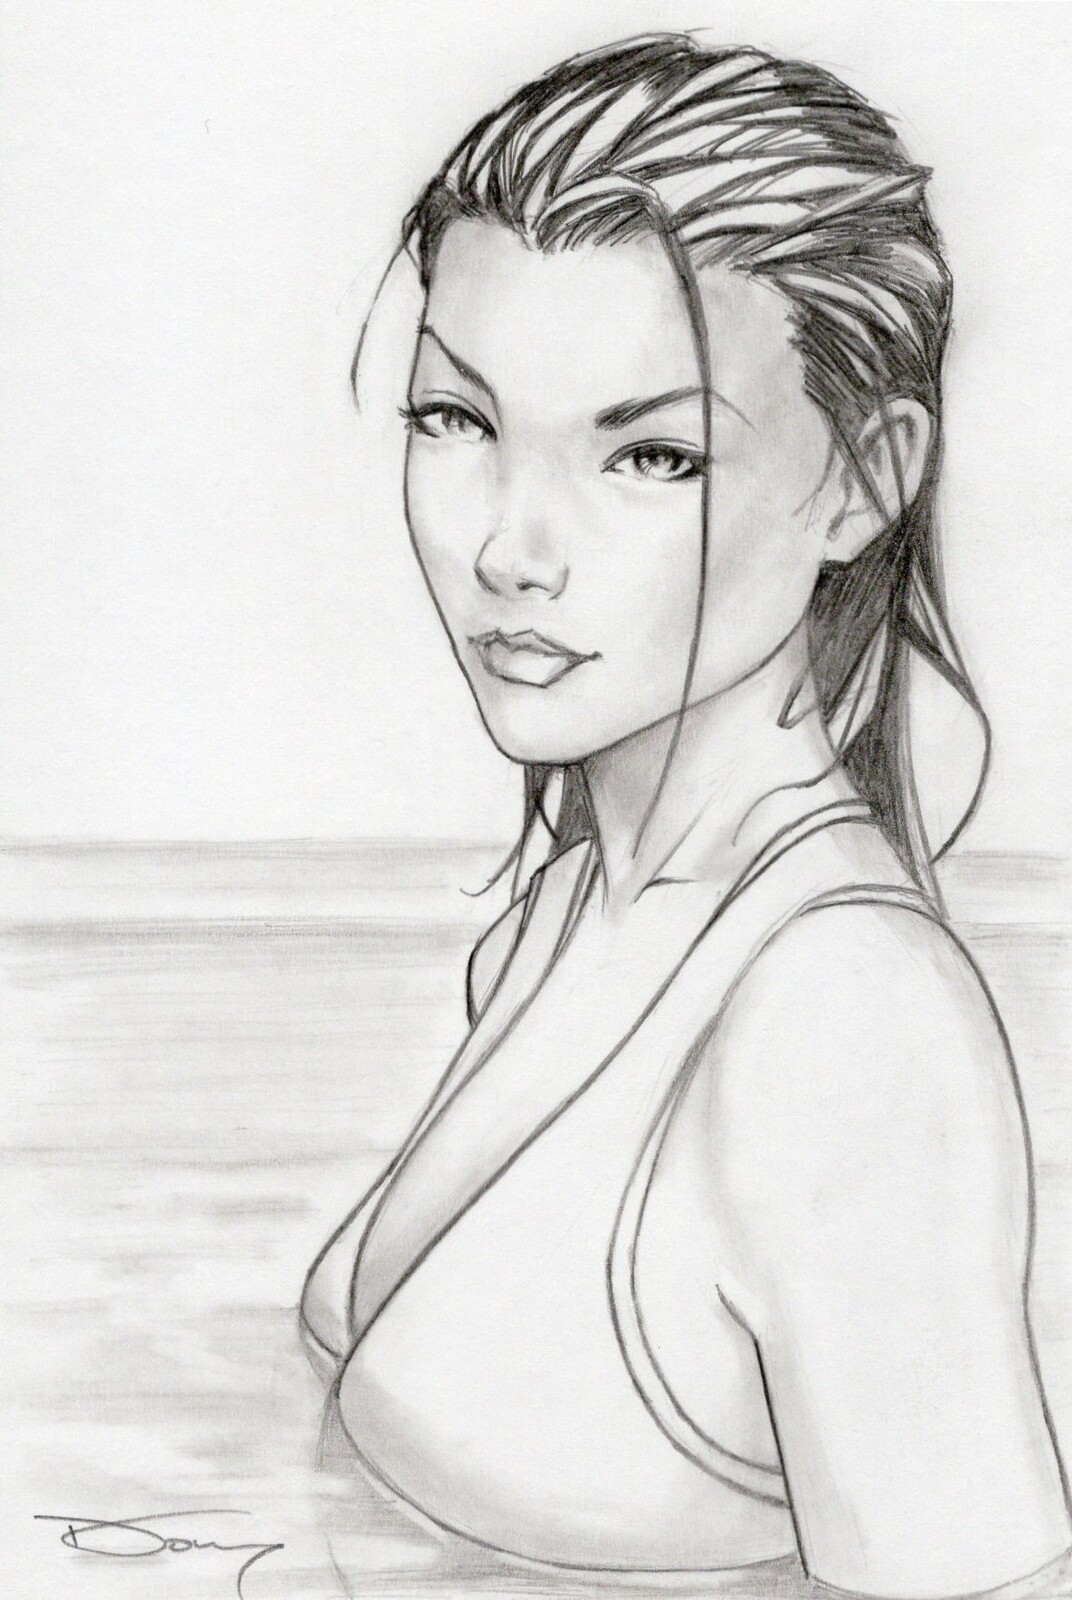 Aspen Matthews from Aspen Comic's Fathom.
Drawn in pencil on 100 lbs white card stock
4 x 6 inch

If you're interested in a commission like this one, please visit my shop for more details!
https://donnydtran.bigcartel.com/